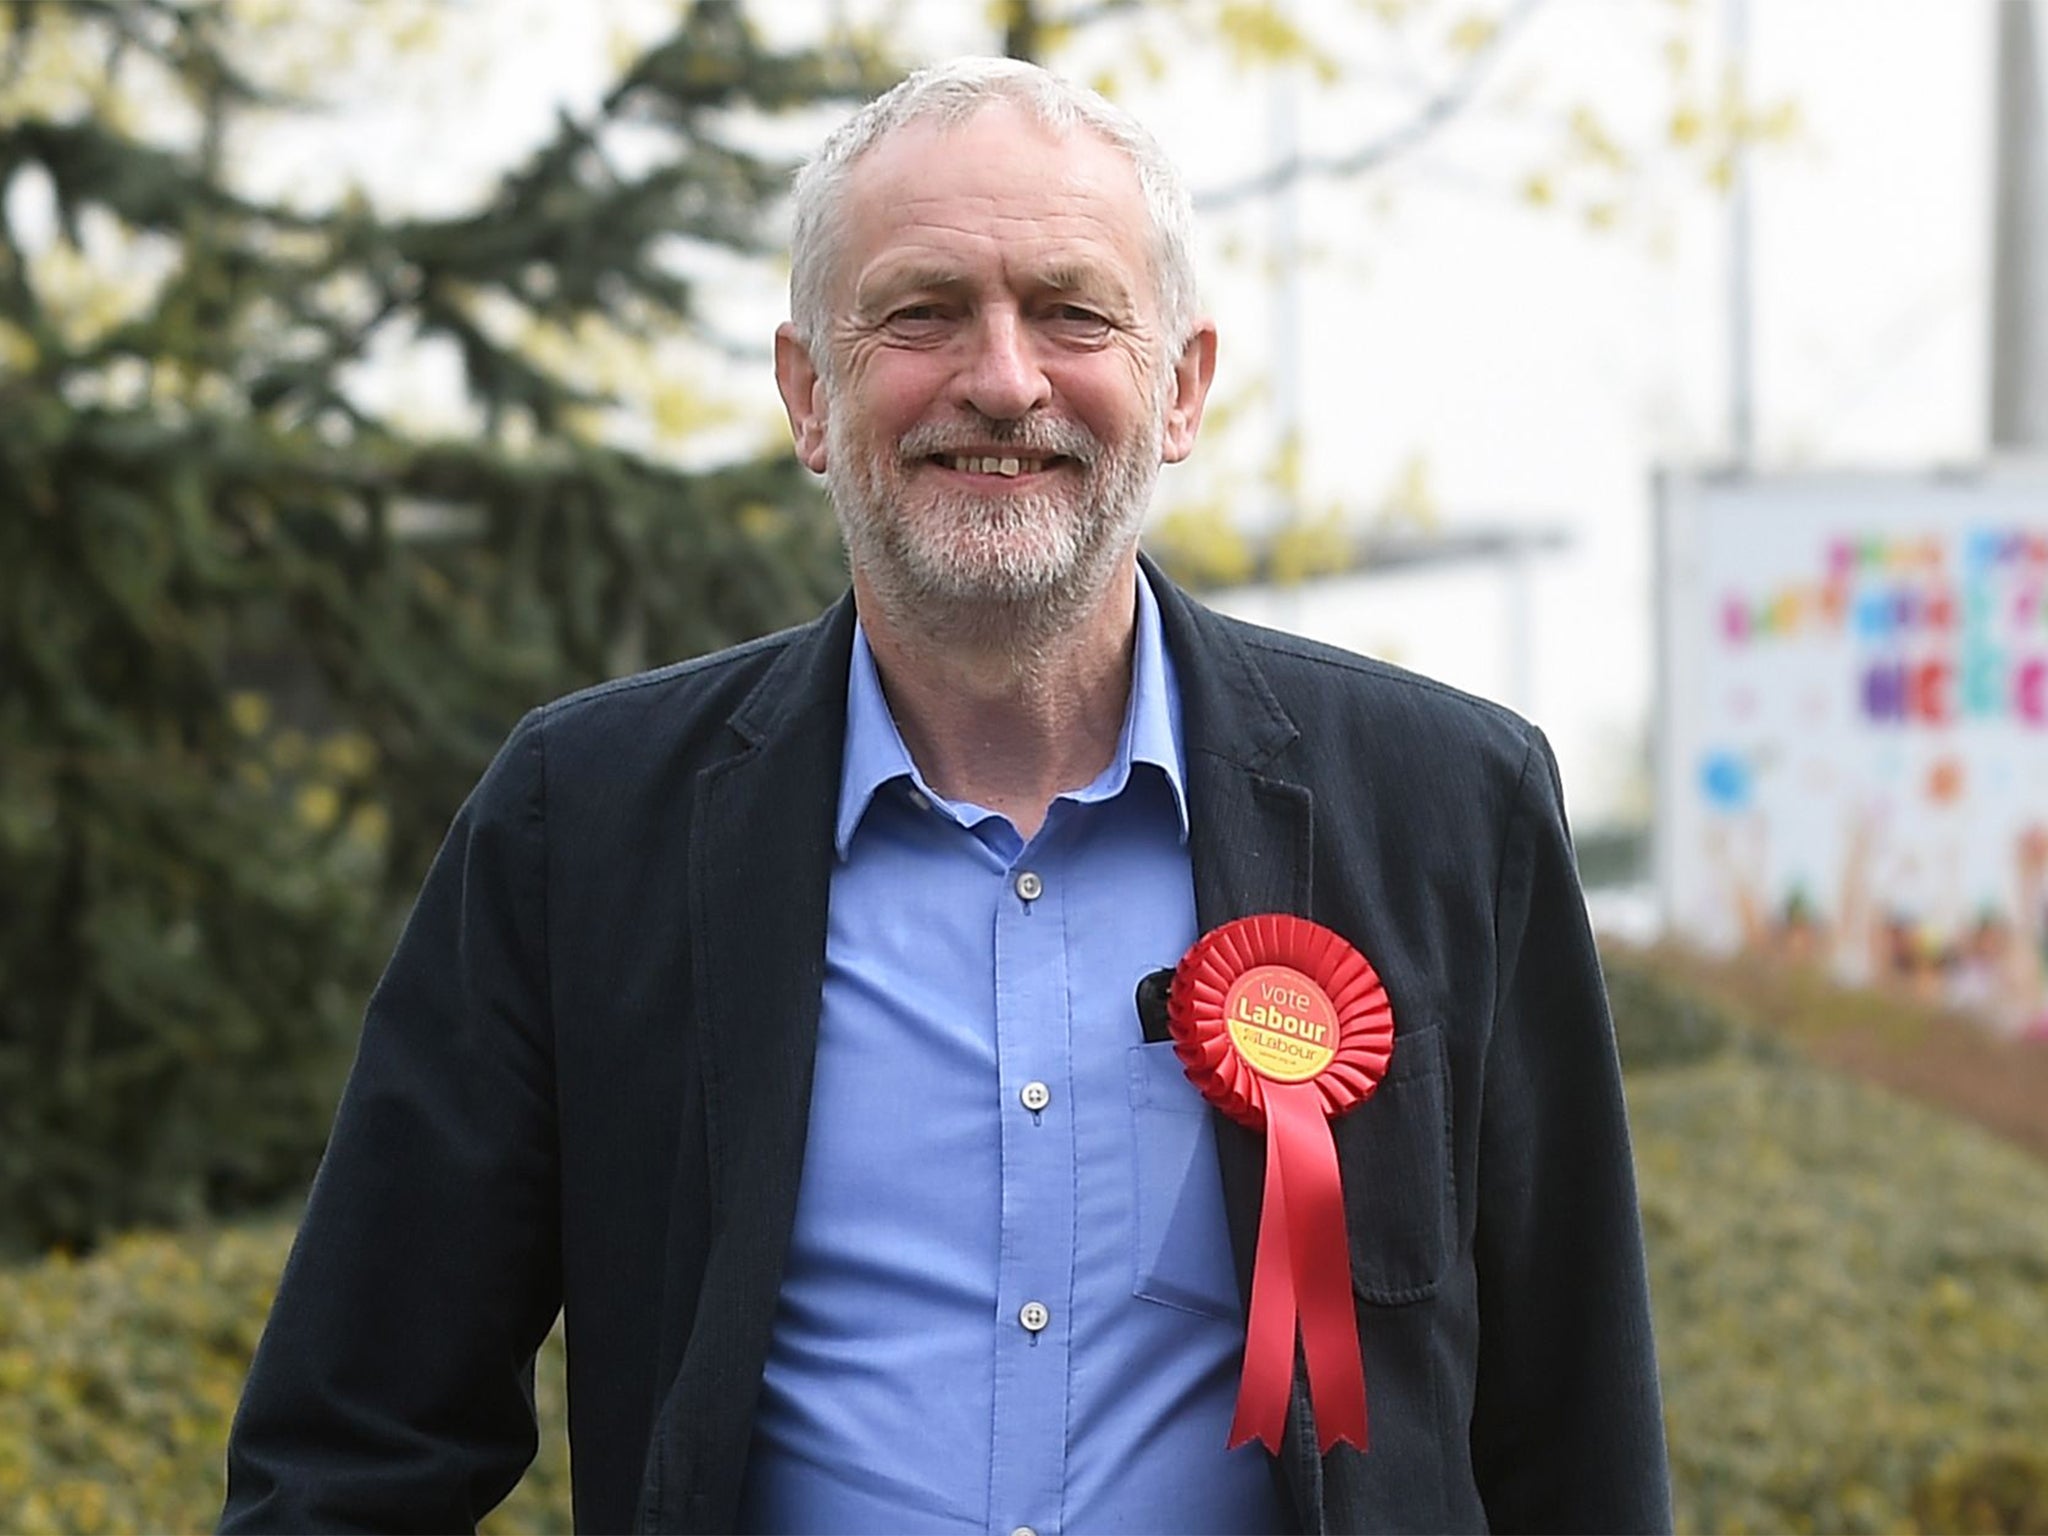 Jeremy Corbyn’s party managed to exceed the low expectations ahead of the elections